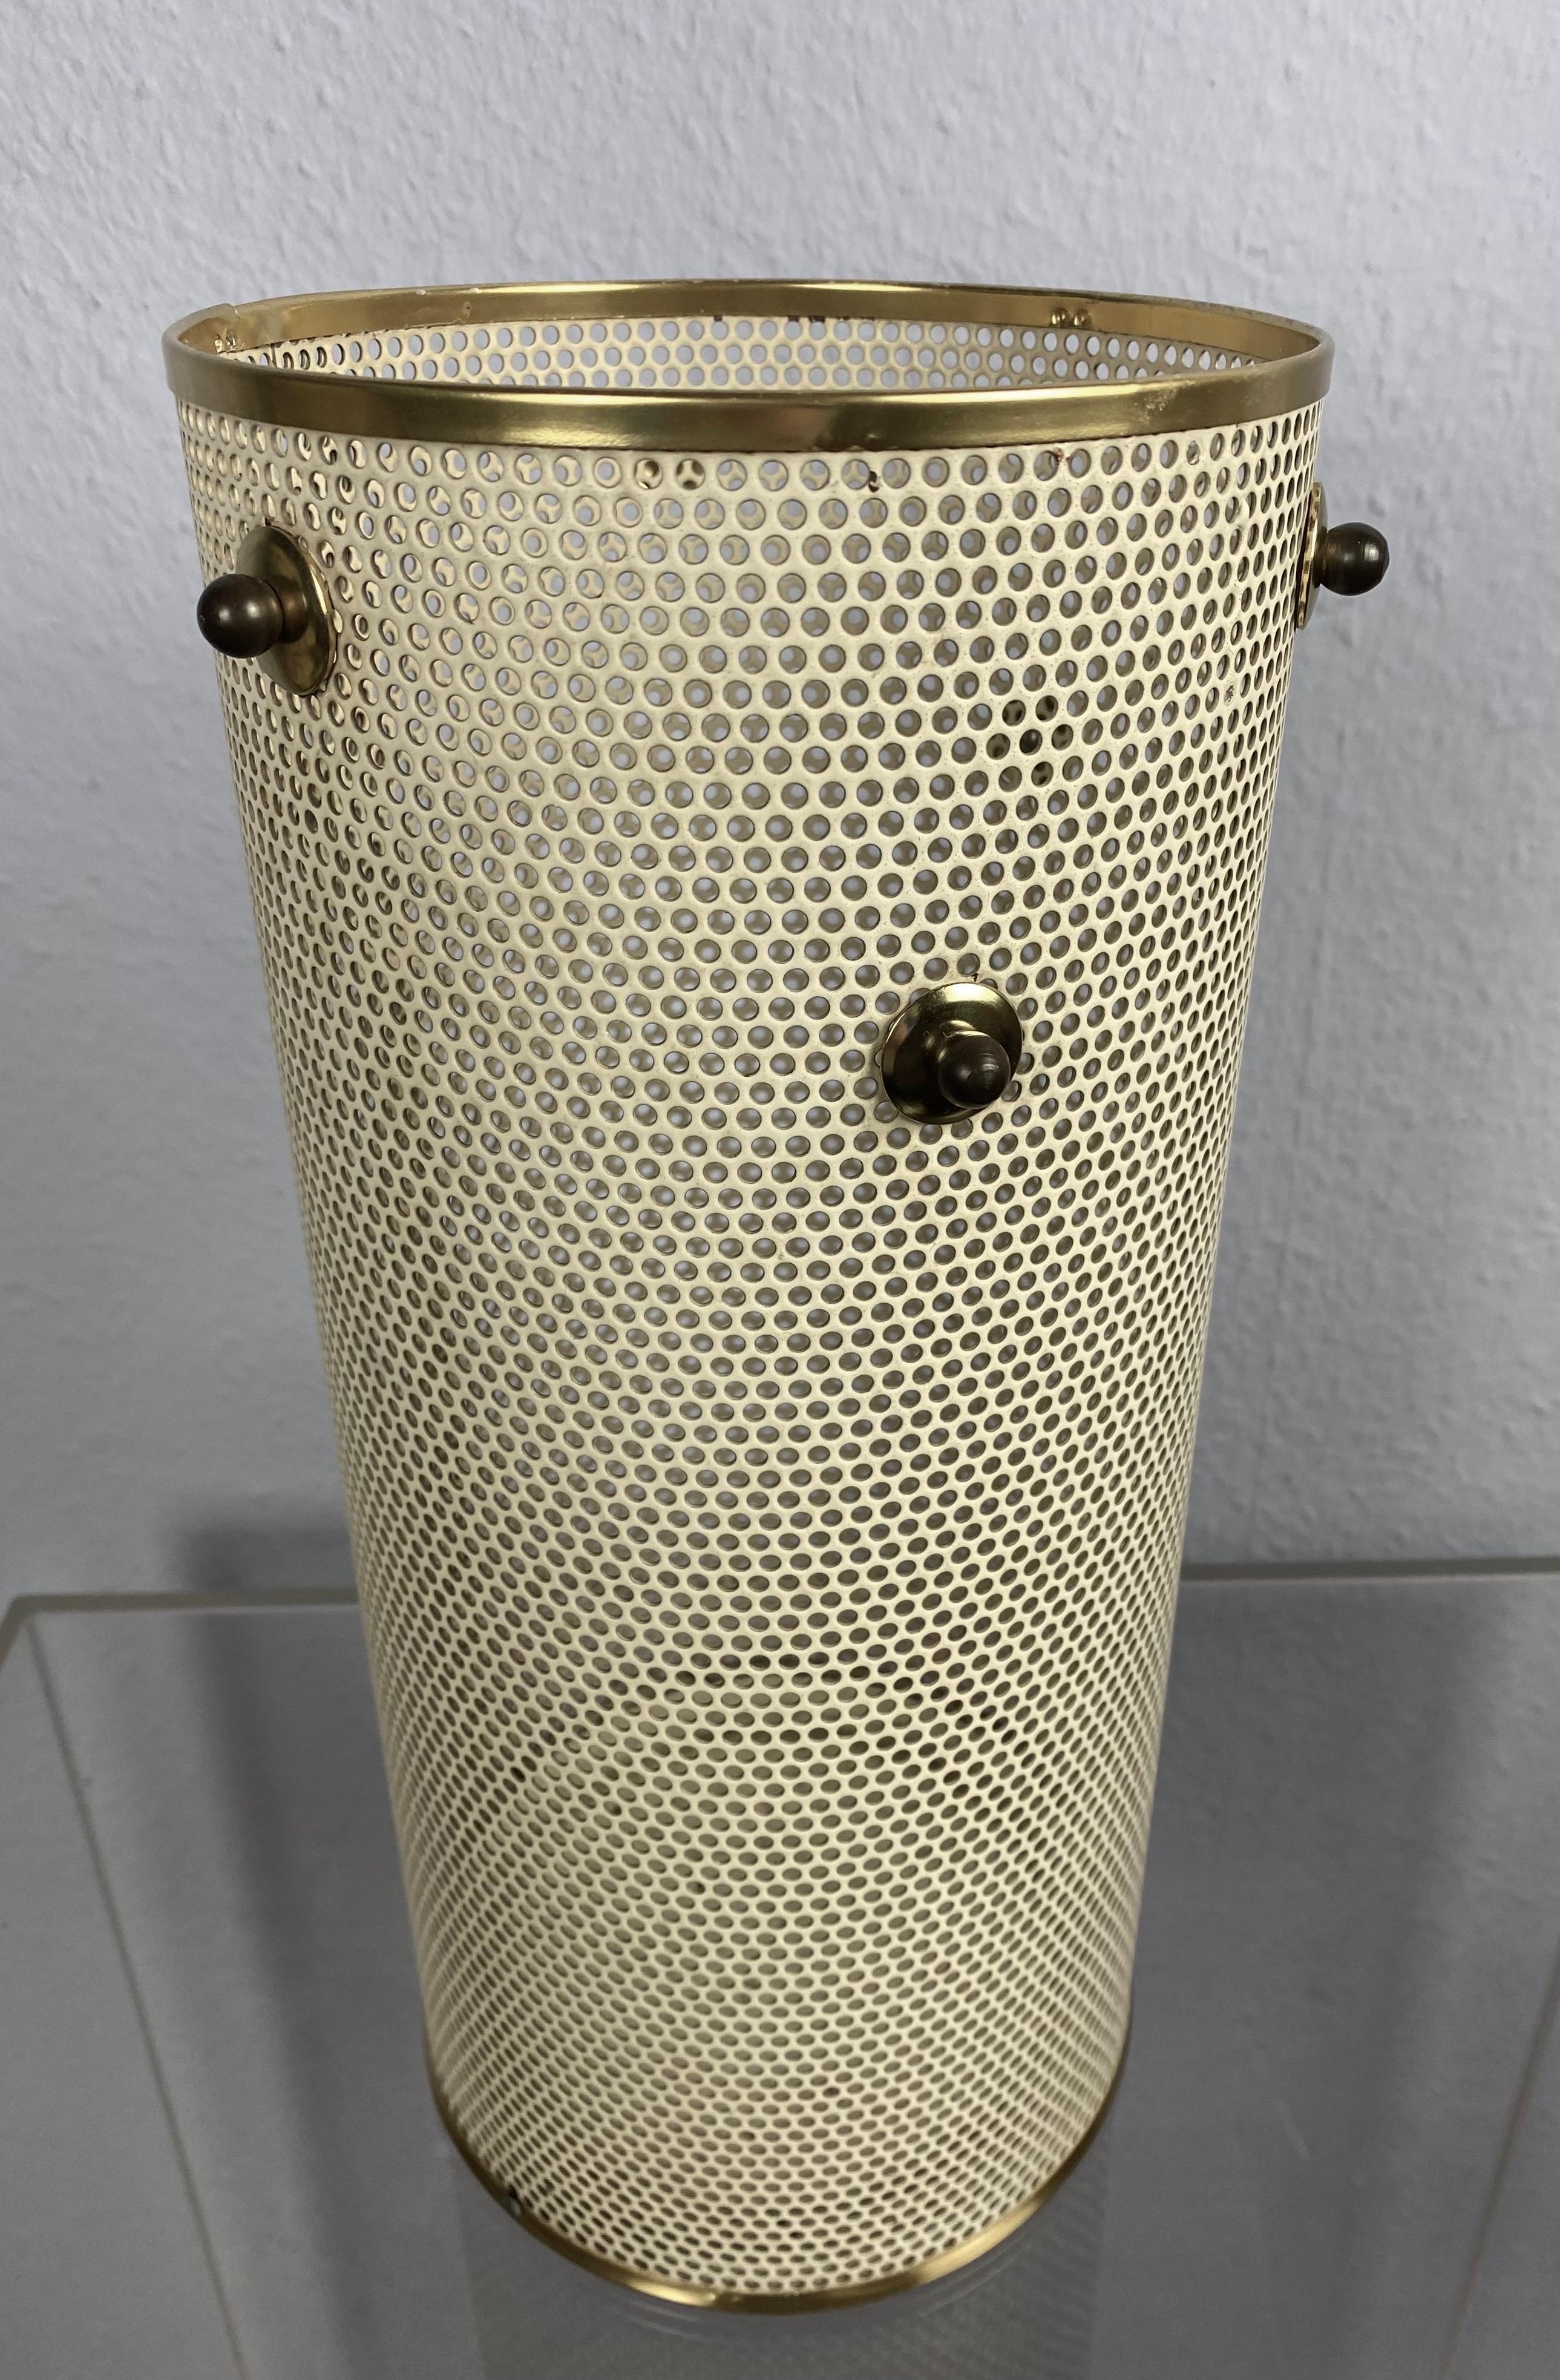 Lacquered Umbrella Stand Mategot 50s cylindrical Vase perforated metal with gold Details  For Sale